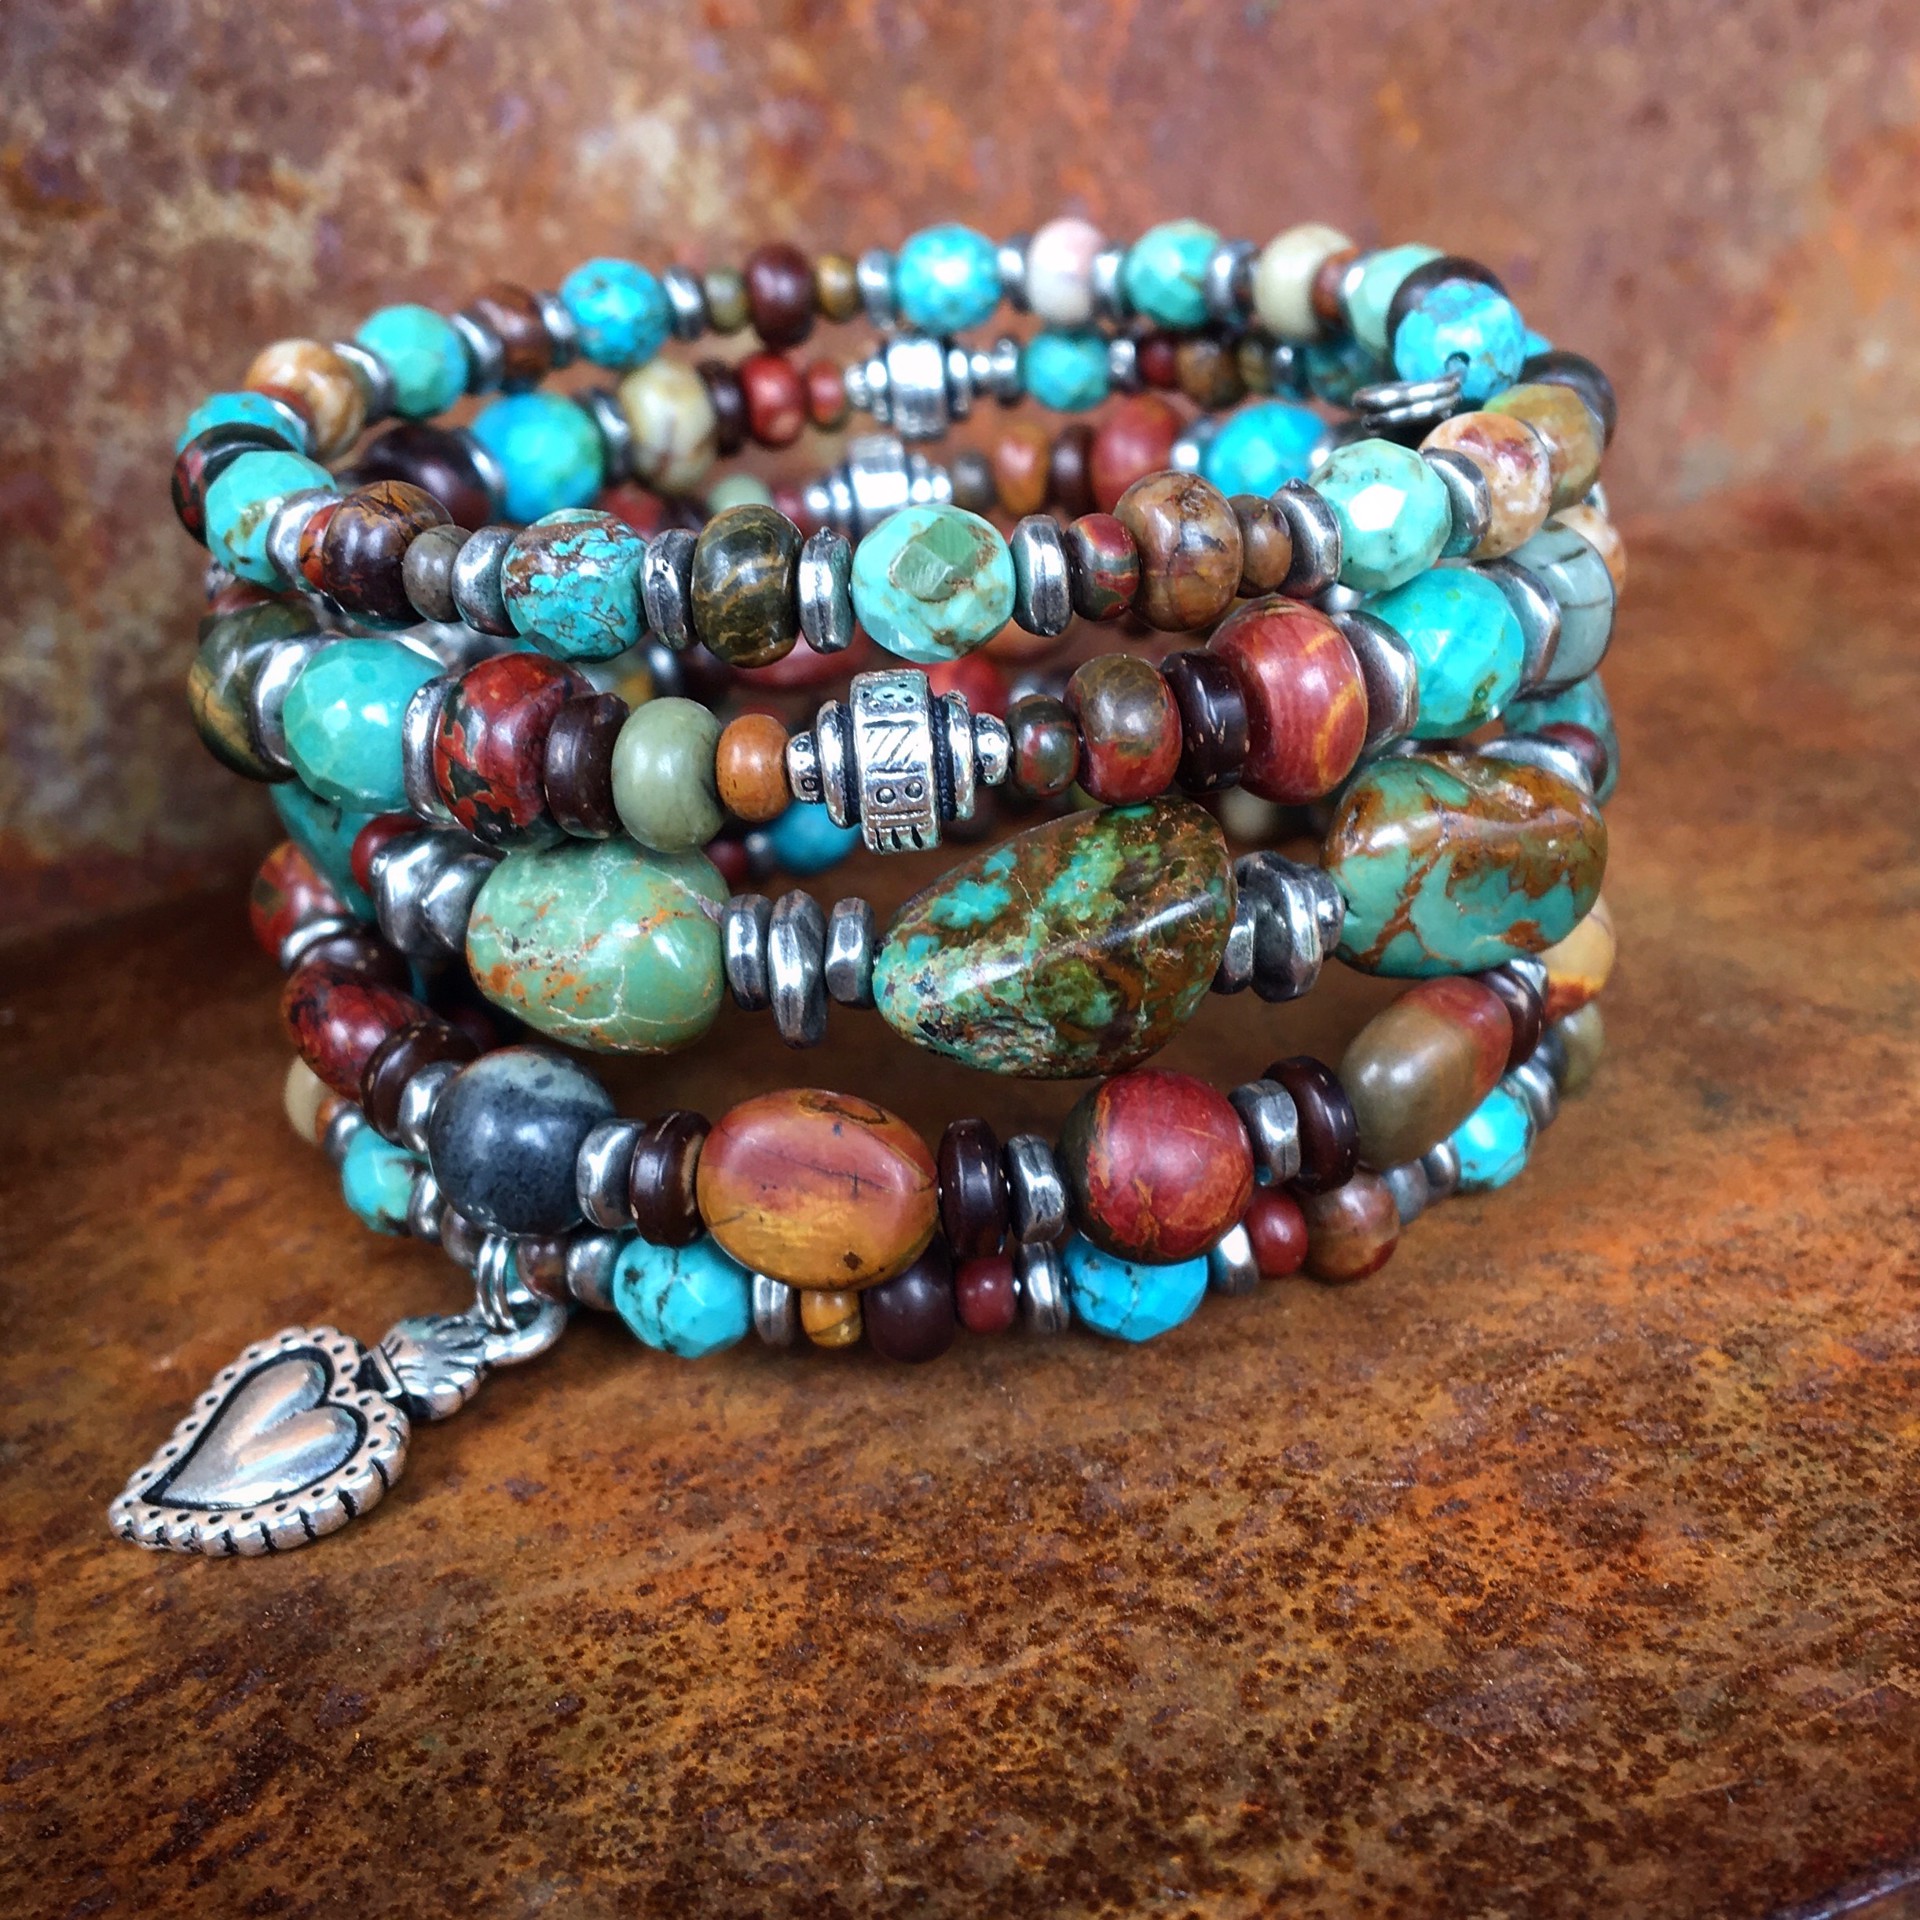 K339 Blue Green Turquoise and Jasper 5 Wrap Bracelet by Kelly Ormsby